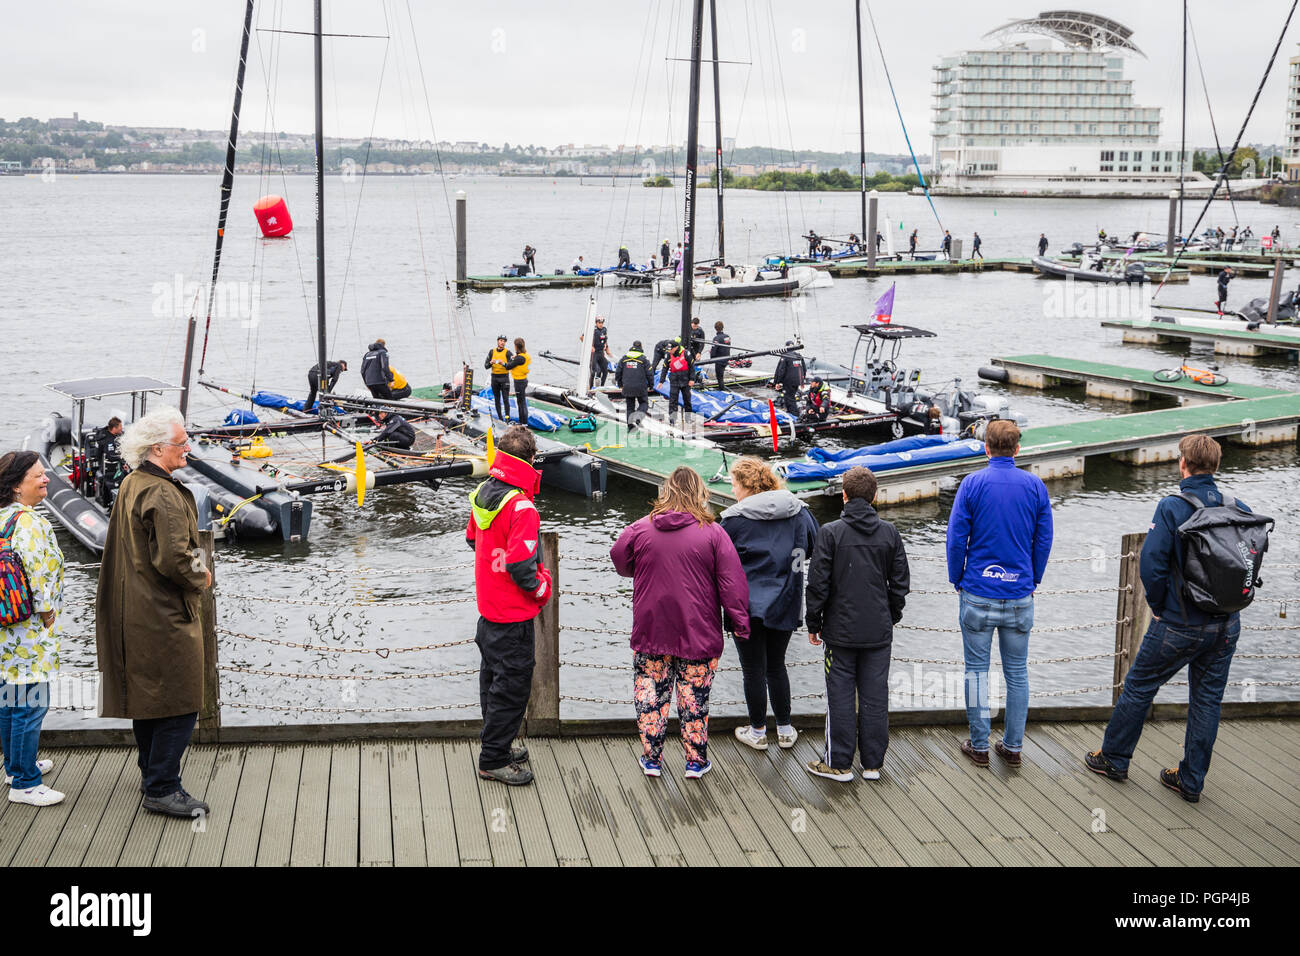 People watching Extreme Sailing at Cardiff Bay, Cardiff 26 Aug, 2018 Stock Photo